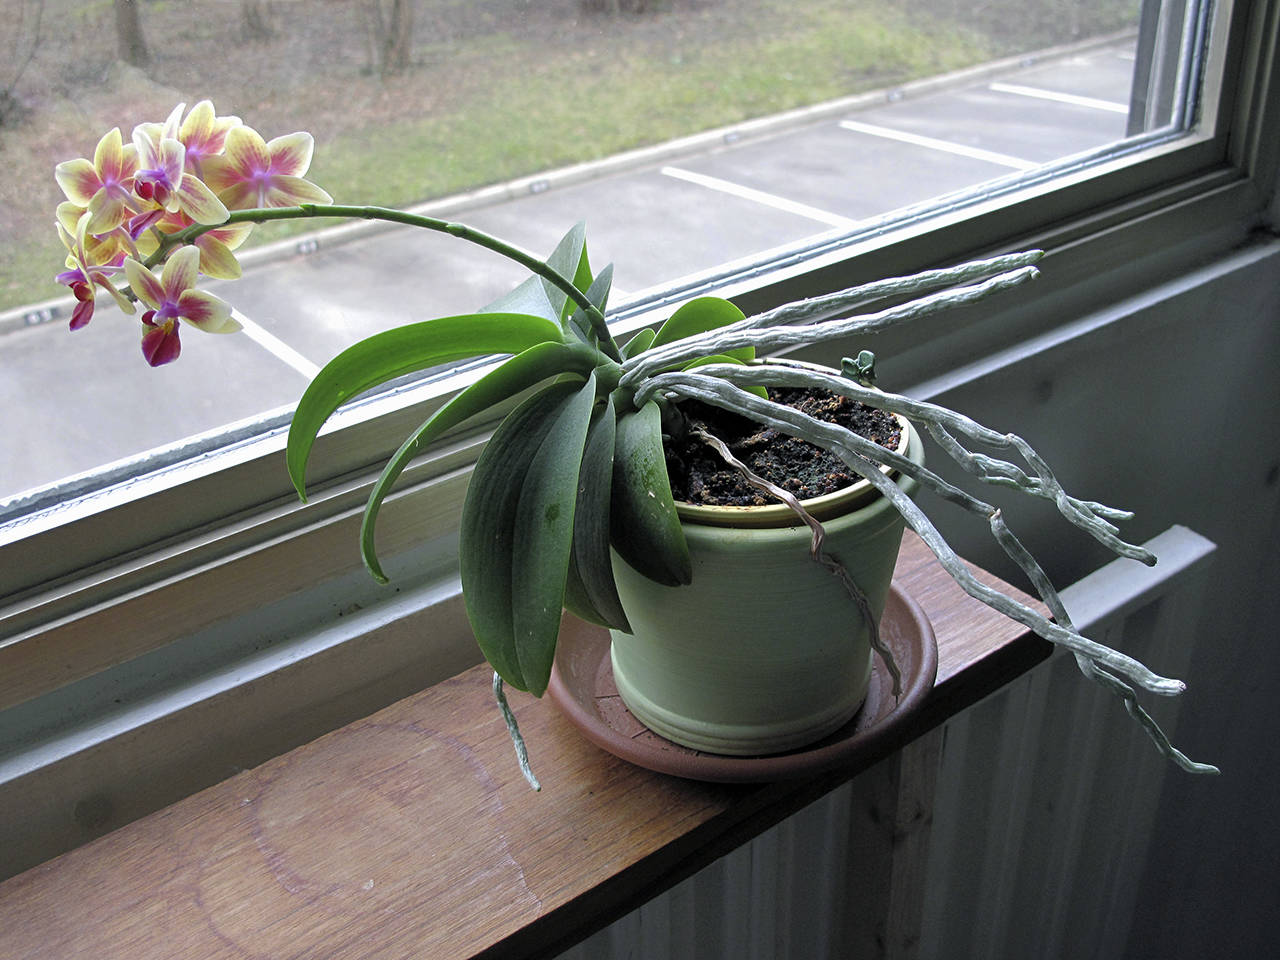 Tangopaso                                This moth orchid Phalaenopsis illustrates phototropism as its blooms appear to reach toward the sunlight.